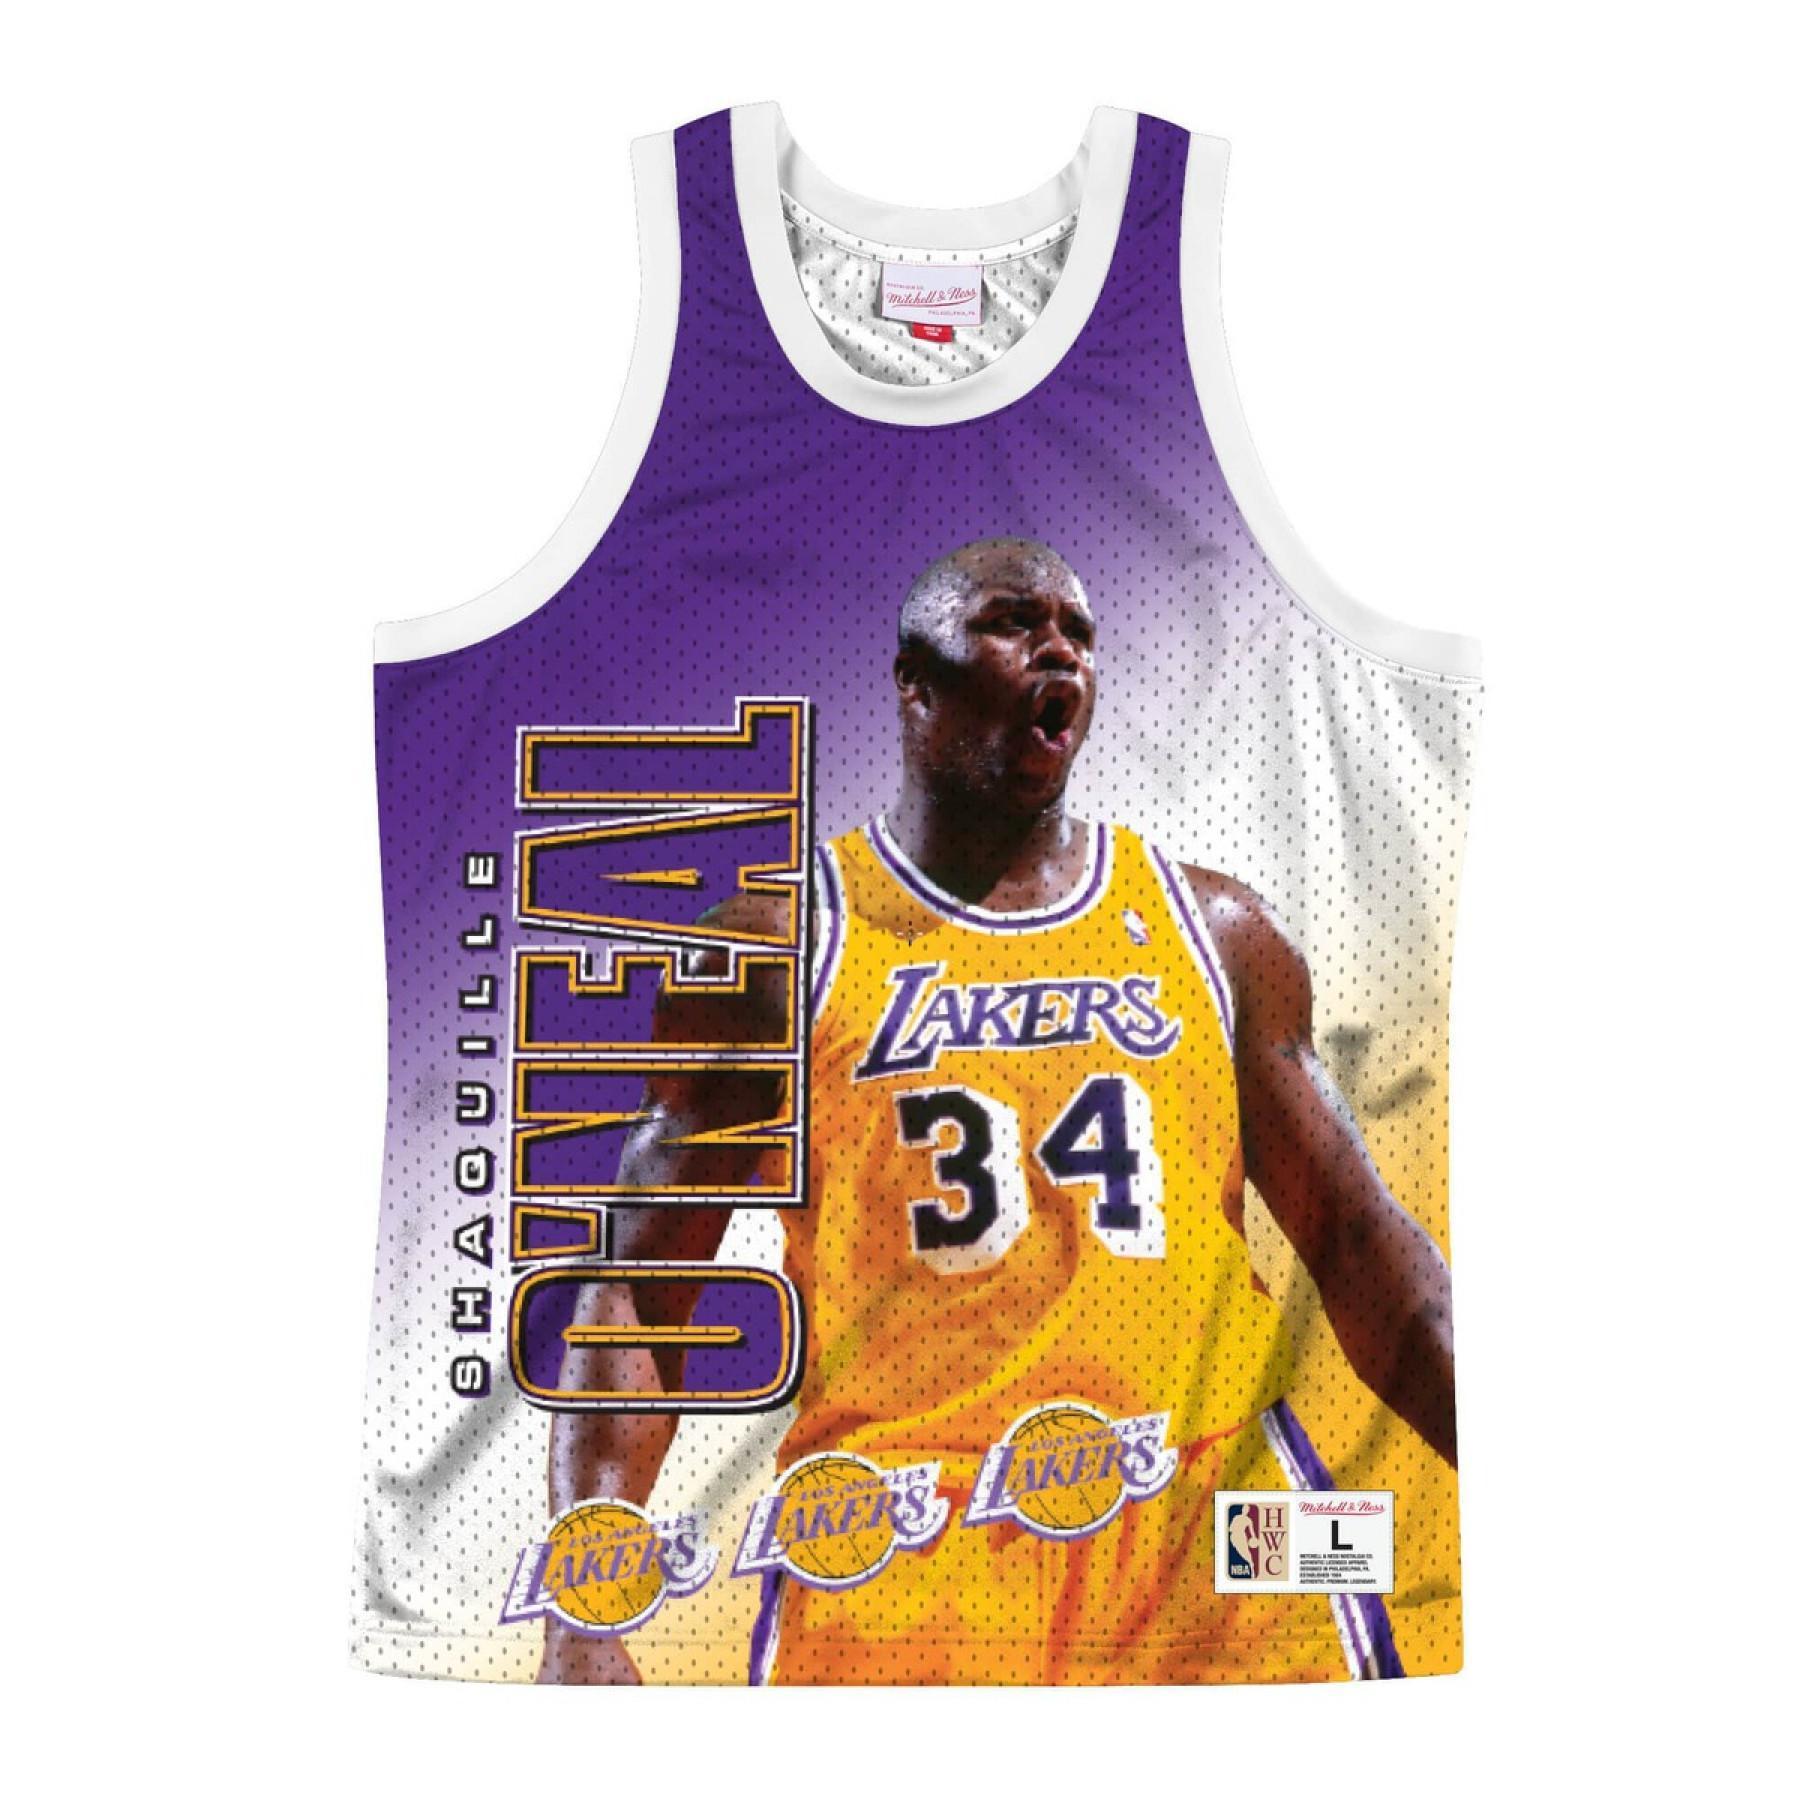 Camisola Los Angeles Lakers behind the back